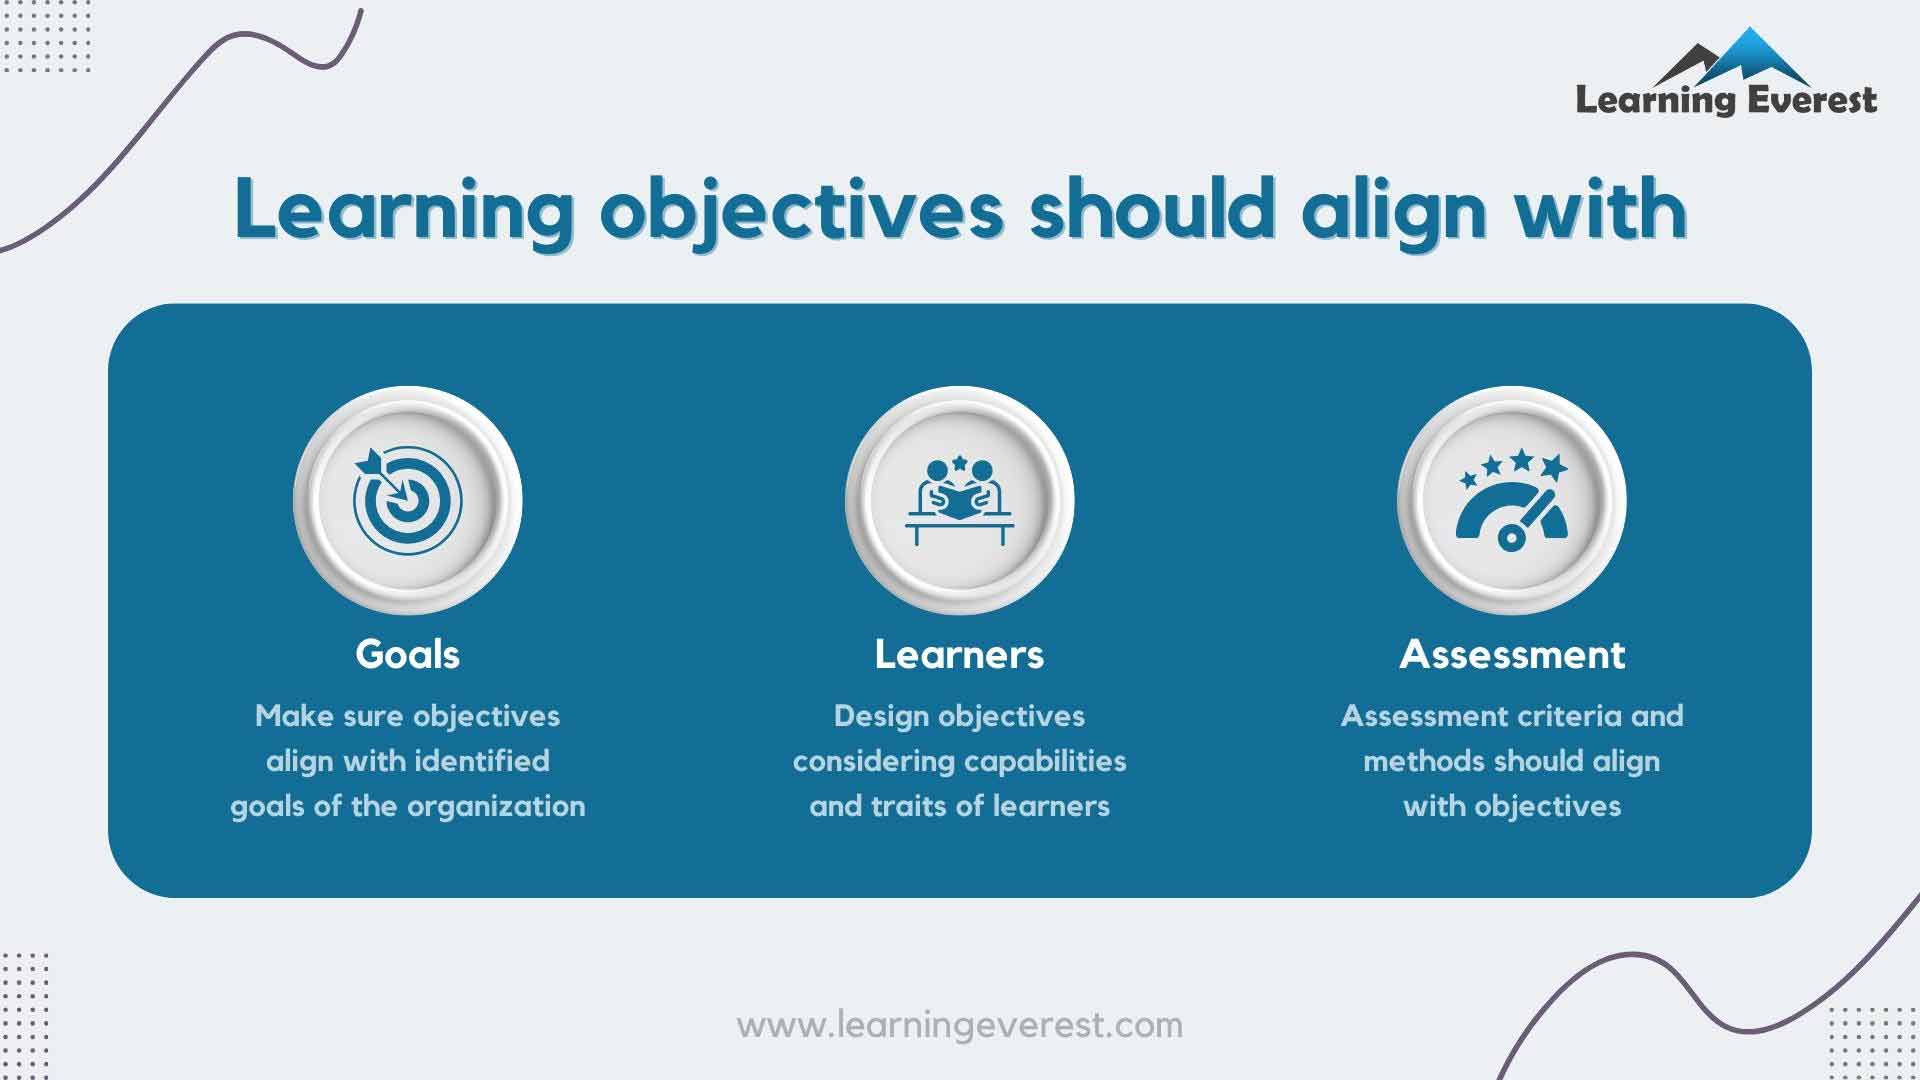 Guidelines for designing sales and marketing training module  - Identify learning objectives